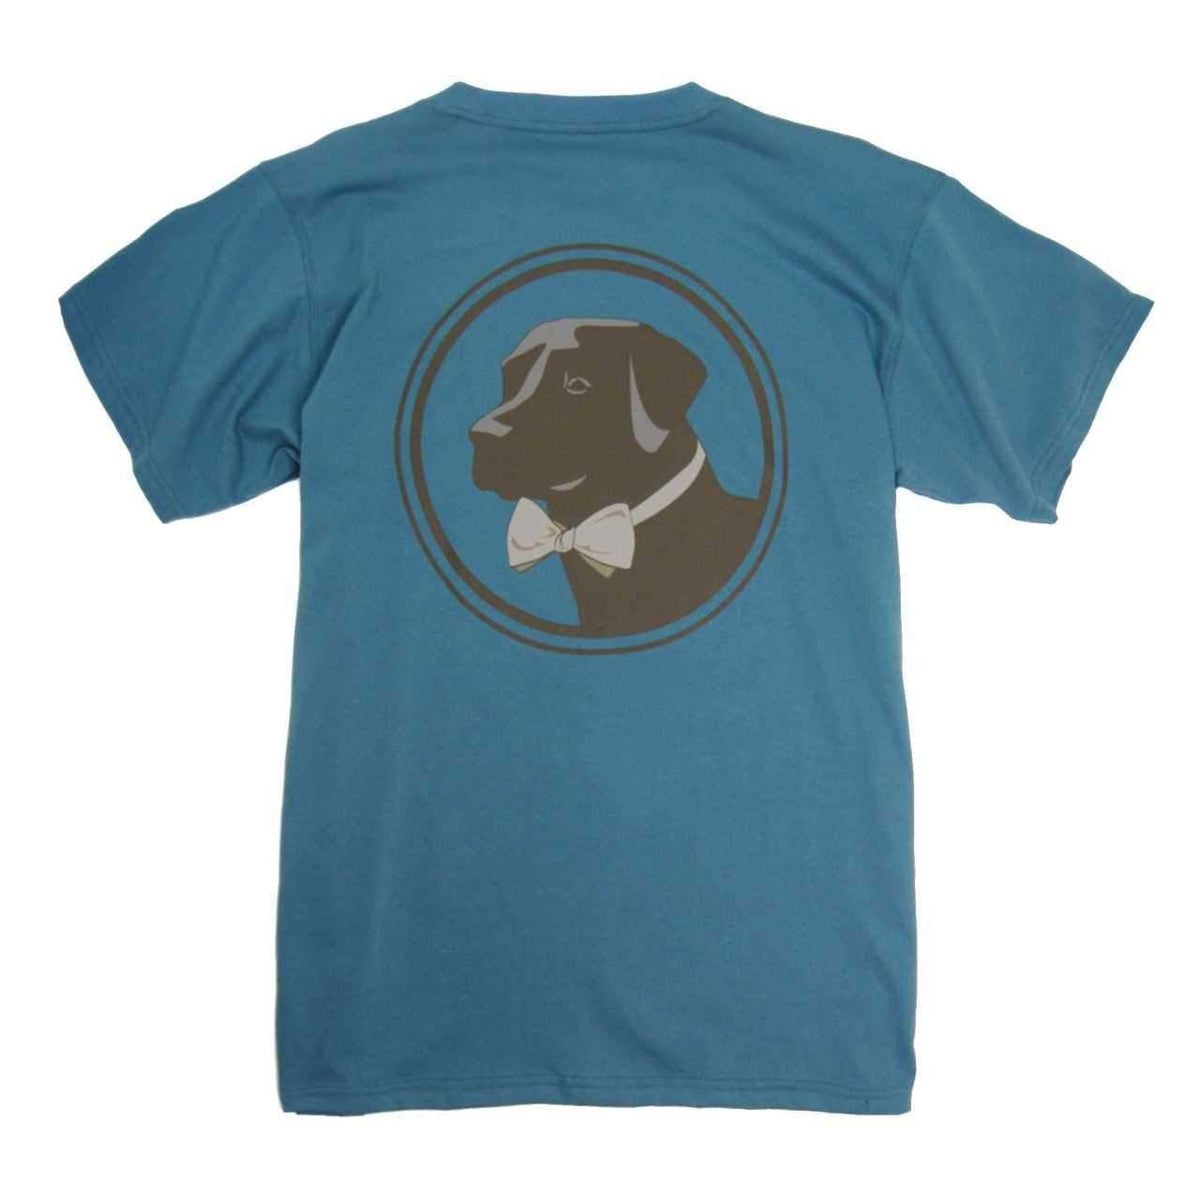 Original Logo Tee in Blue Stone by Southern Proper - Country Club Prep